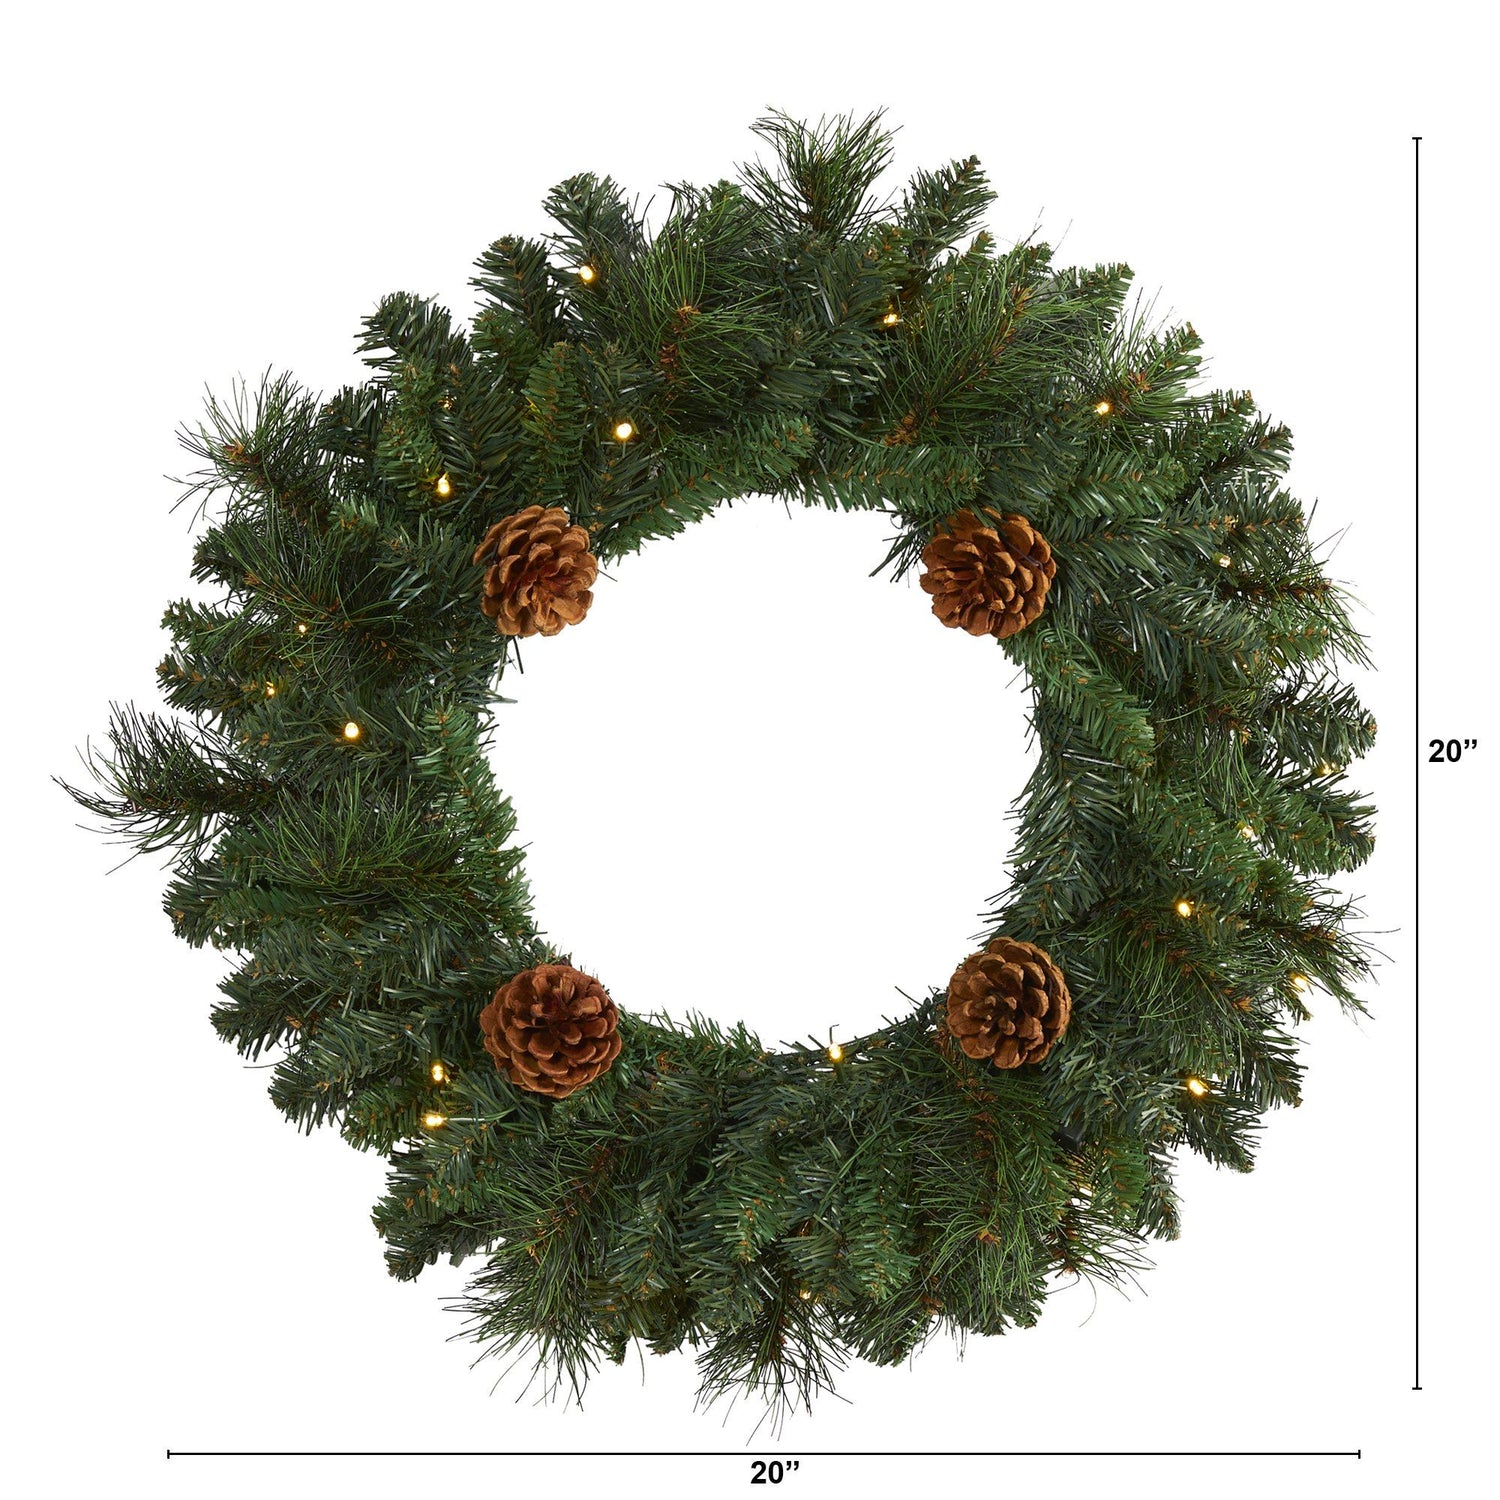 20” Pine Artificial Christmas Wreath with 35 LED Lights and Pinecones